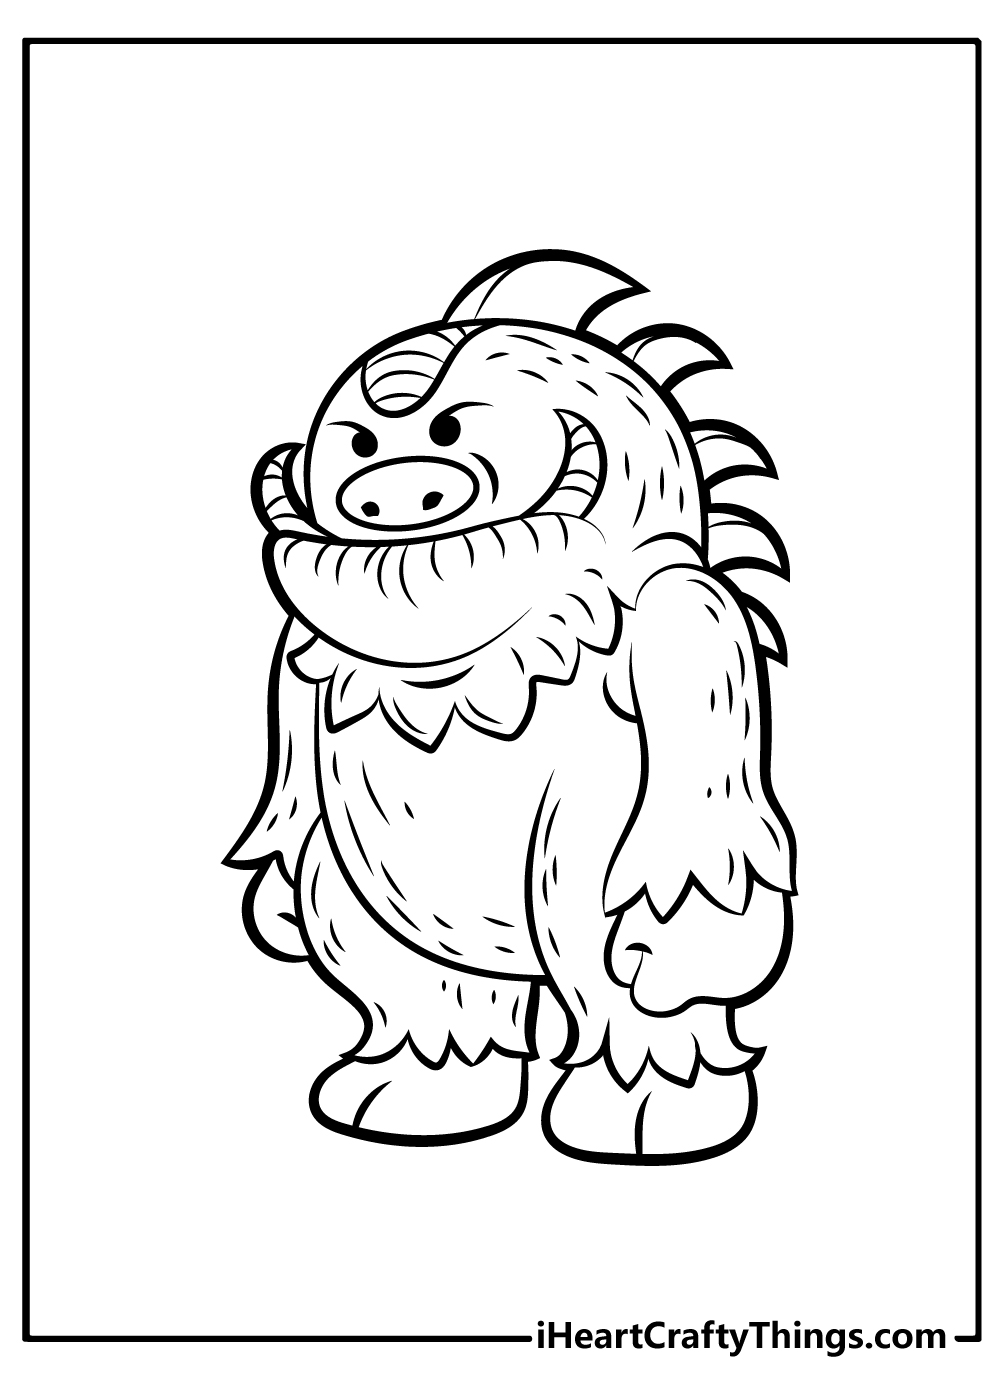 Monster Coloring Pages for adults free download